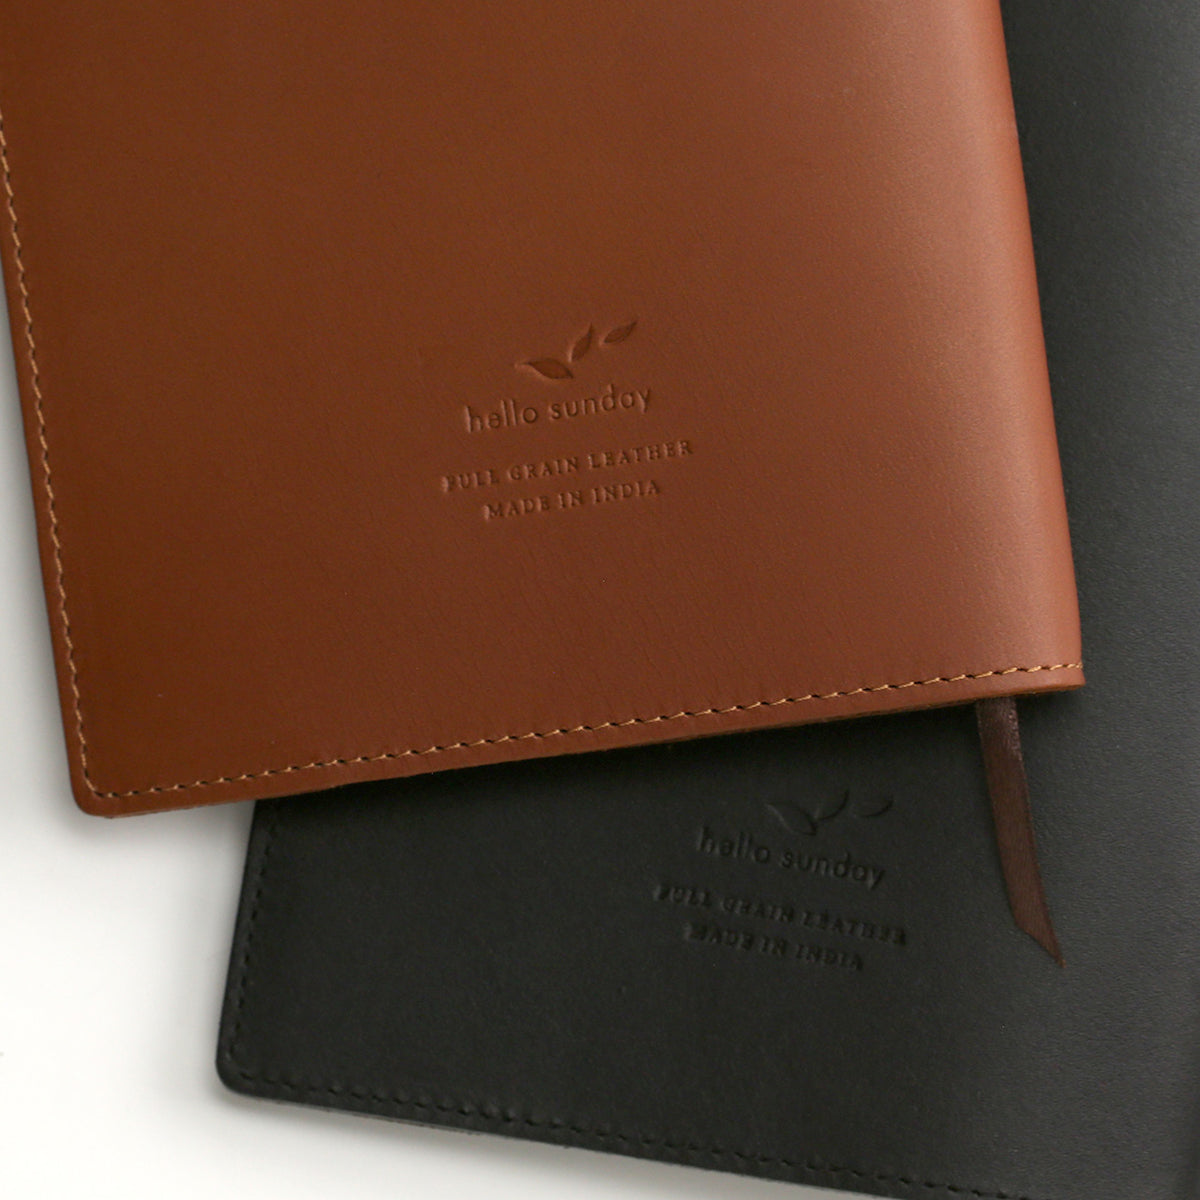 Hello Sunday logo on the back of one tan and one black leather jacket for notebooks